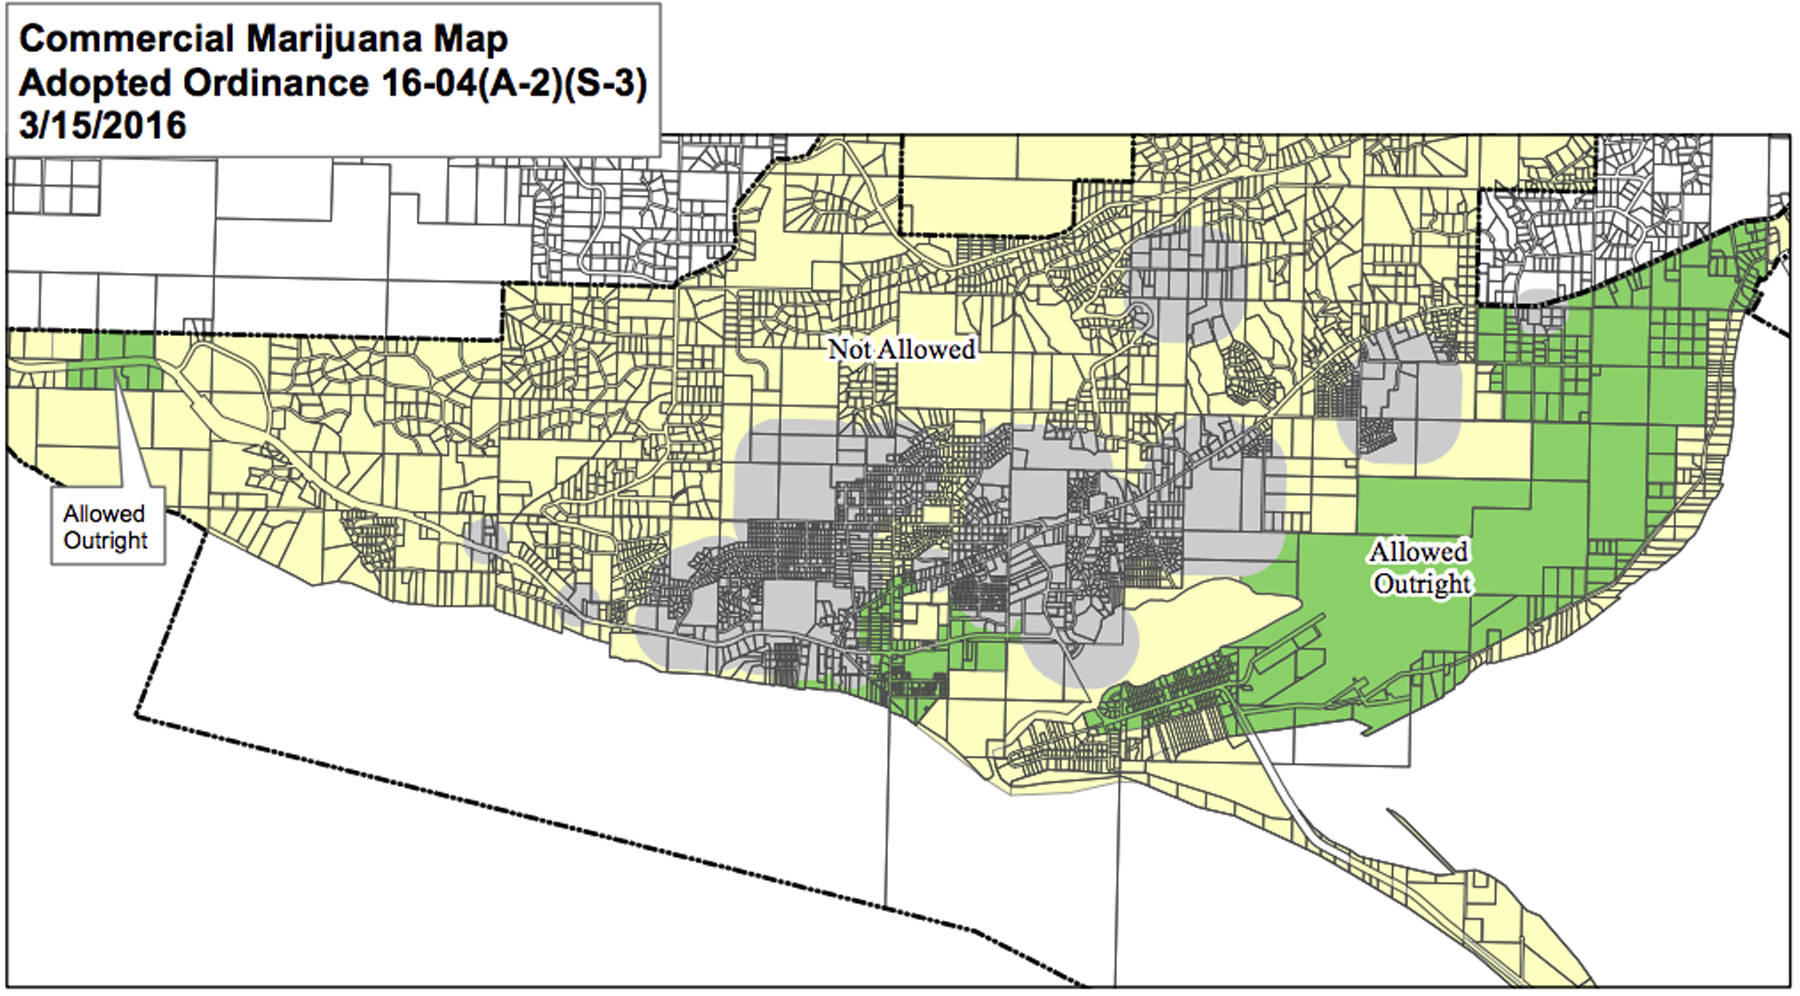 This zoning map from the City of Homer website shows the districts in town where commercial marijuana is allowed and where it is not allowed currently. (Image courtesty City of Homer)